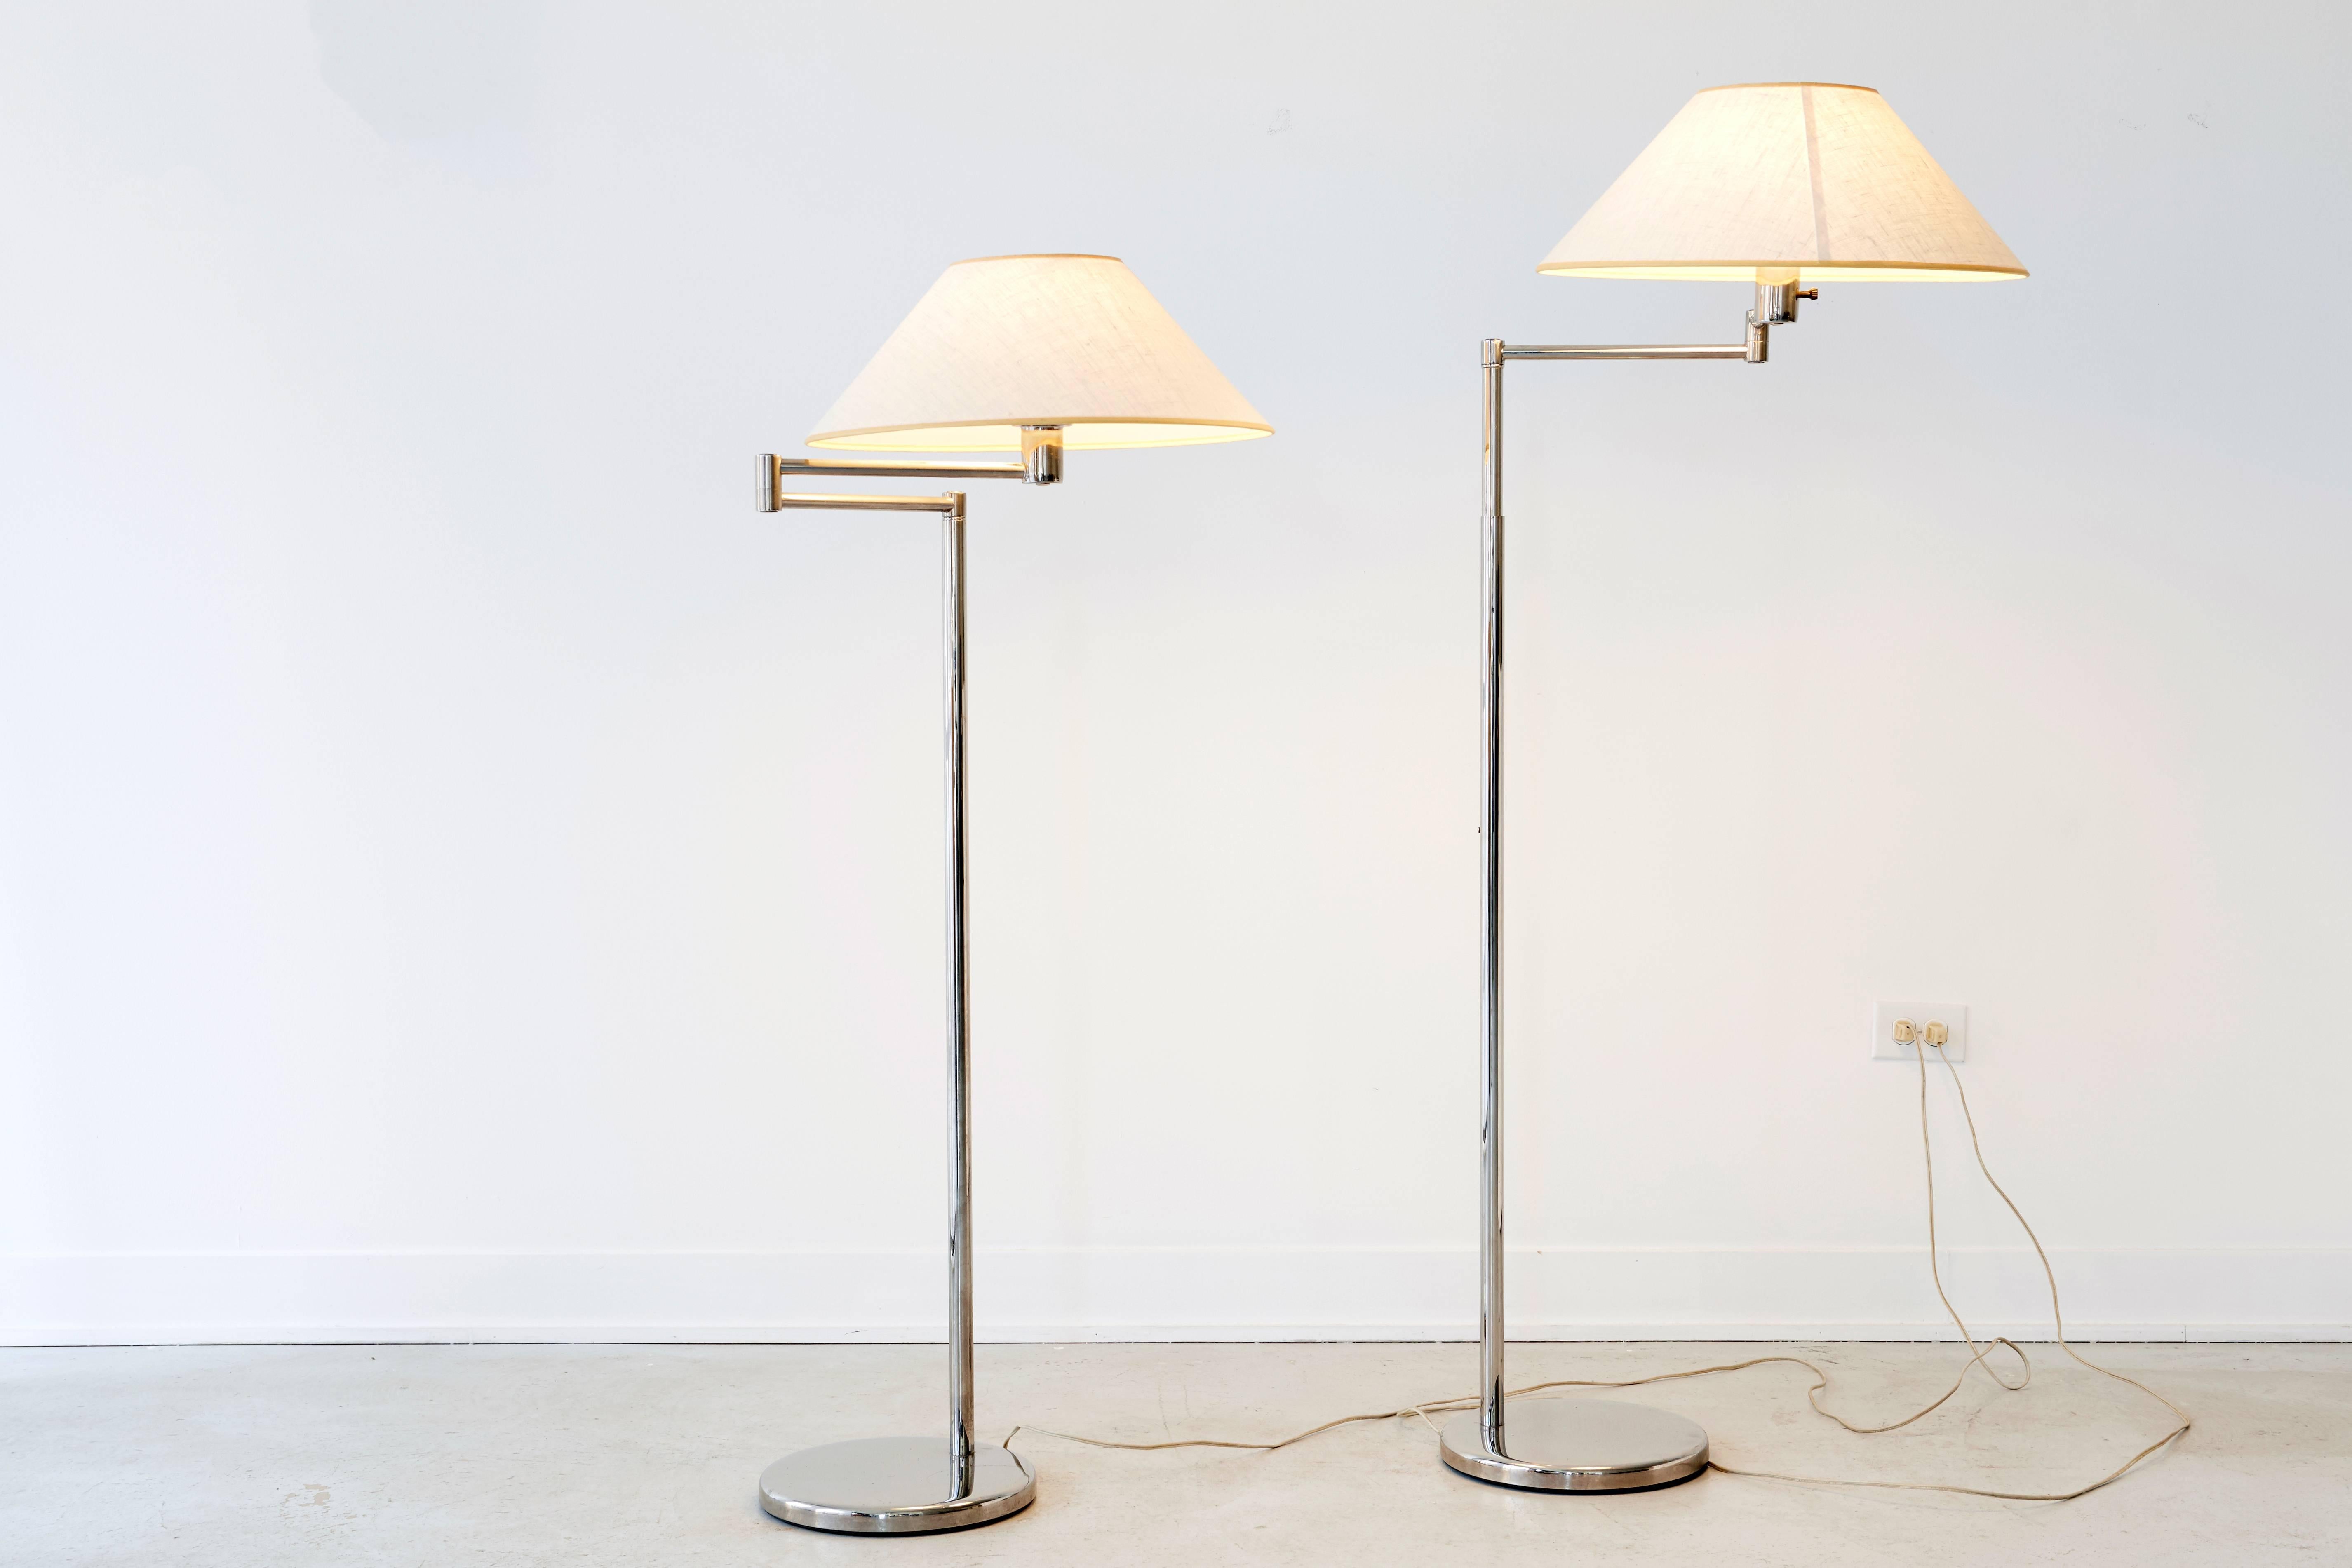 Pair of adjustable Walter Von Nessen swing arm lamps. Chrome lamps with original shades in excellent condition. Lamps adjust from 48''-58''.